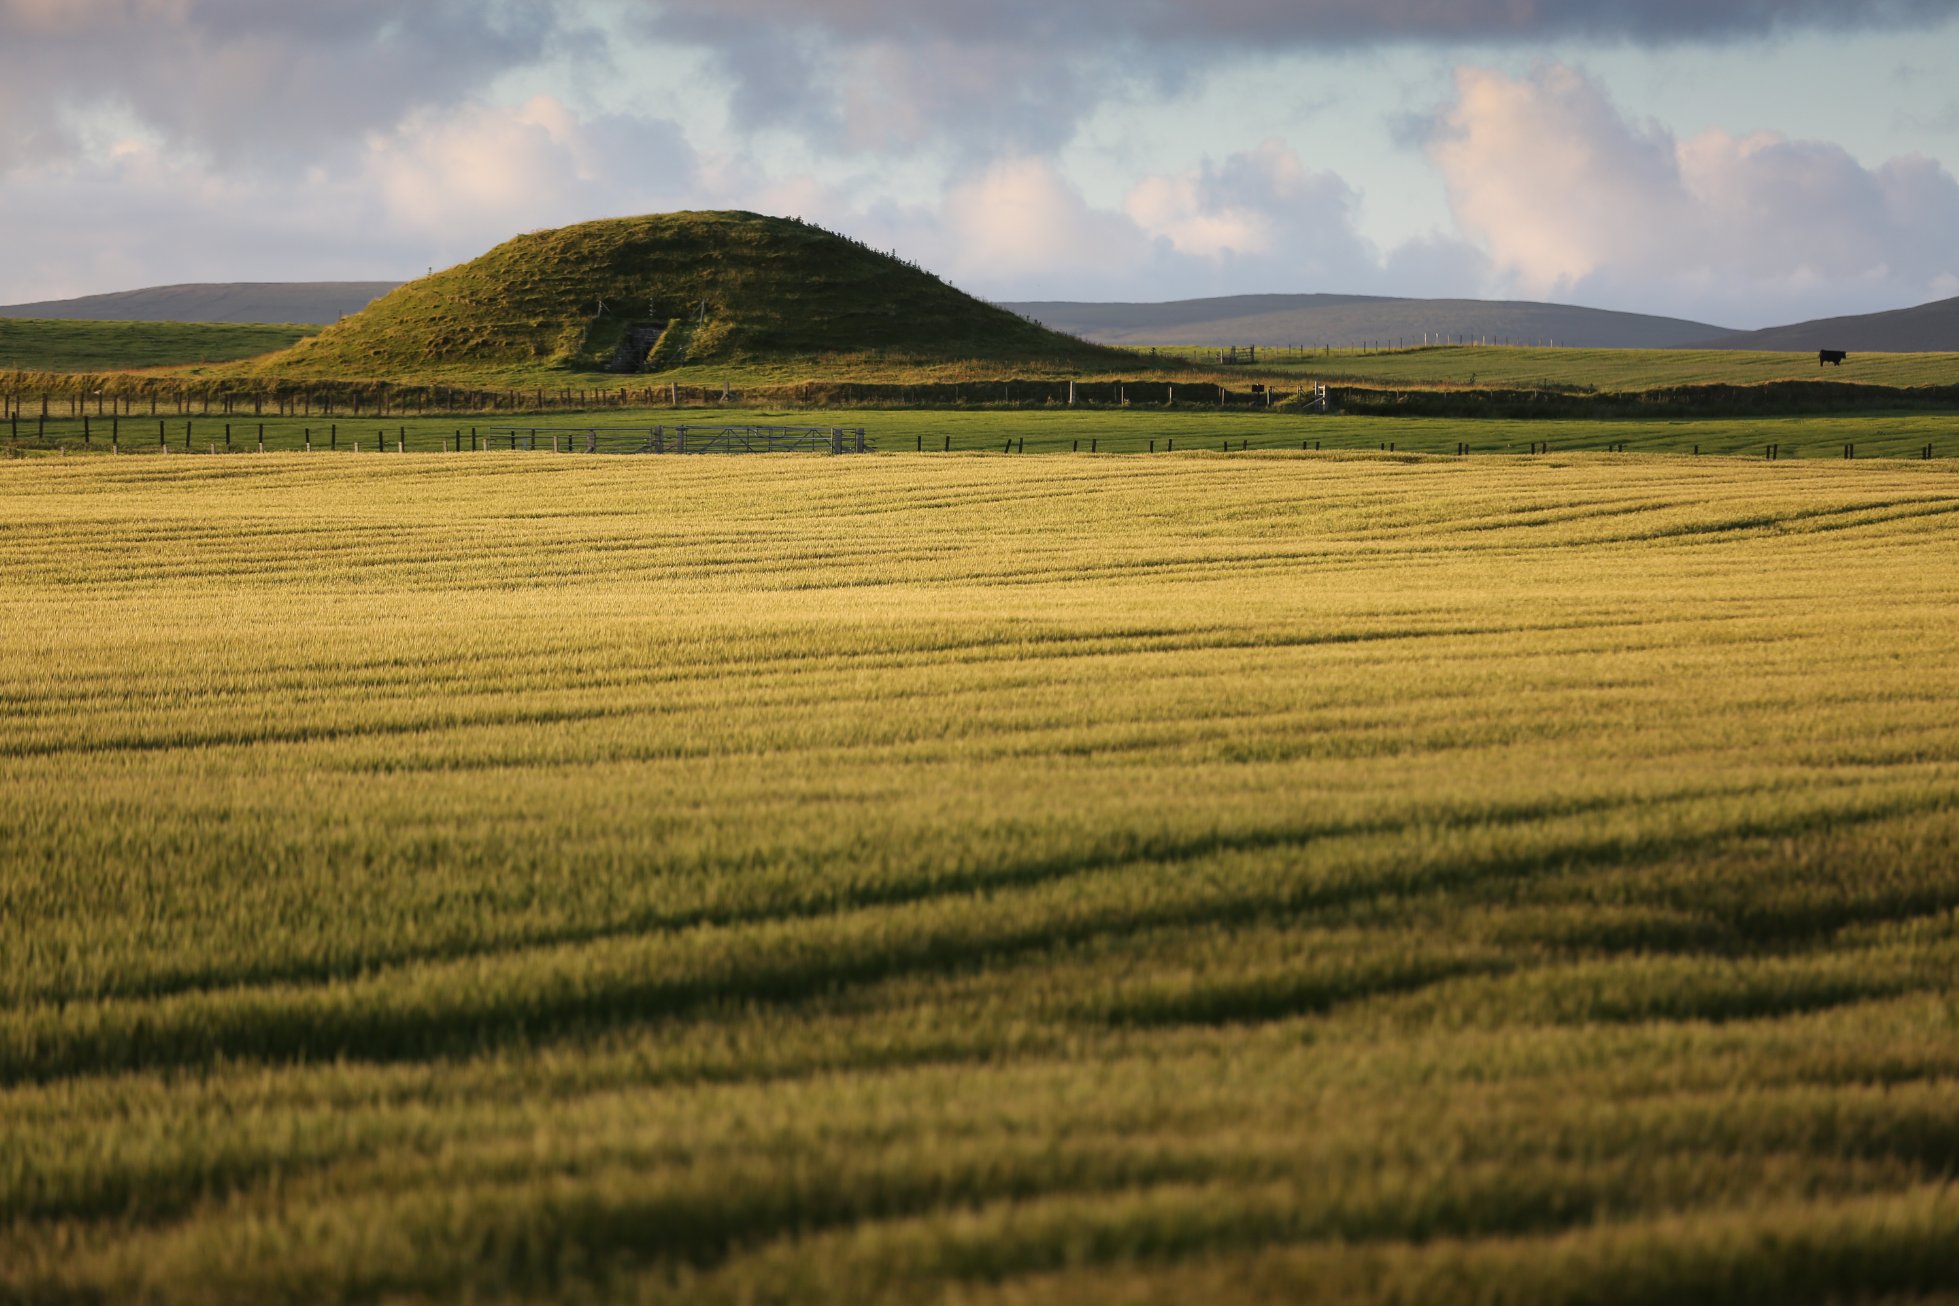 Find out how you can visit Maeshowe